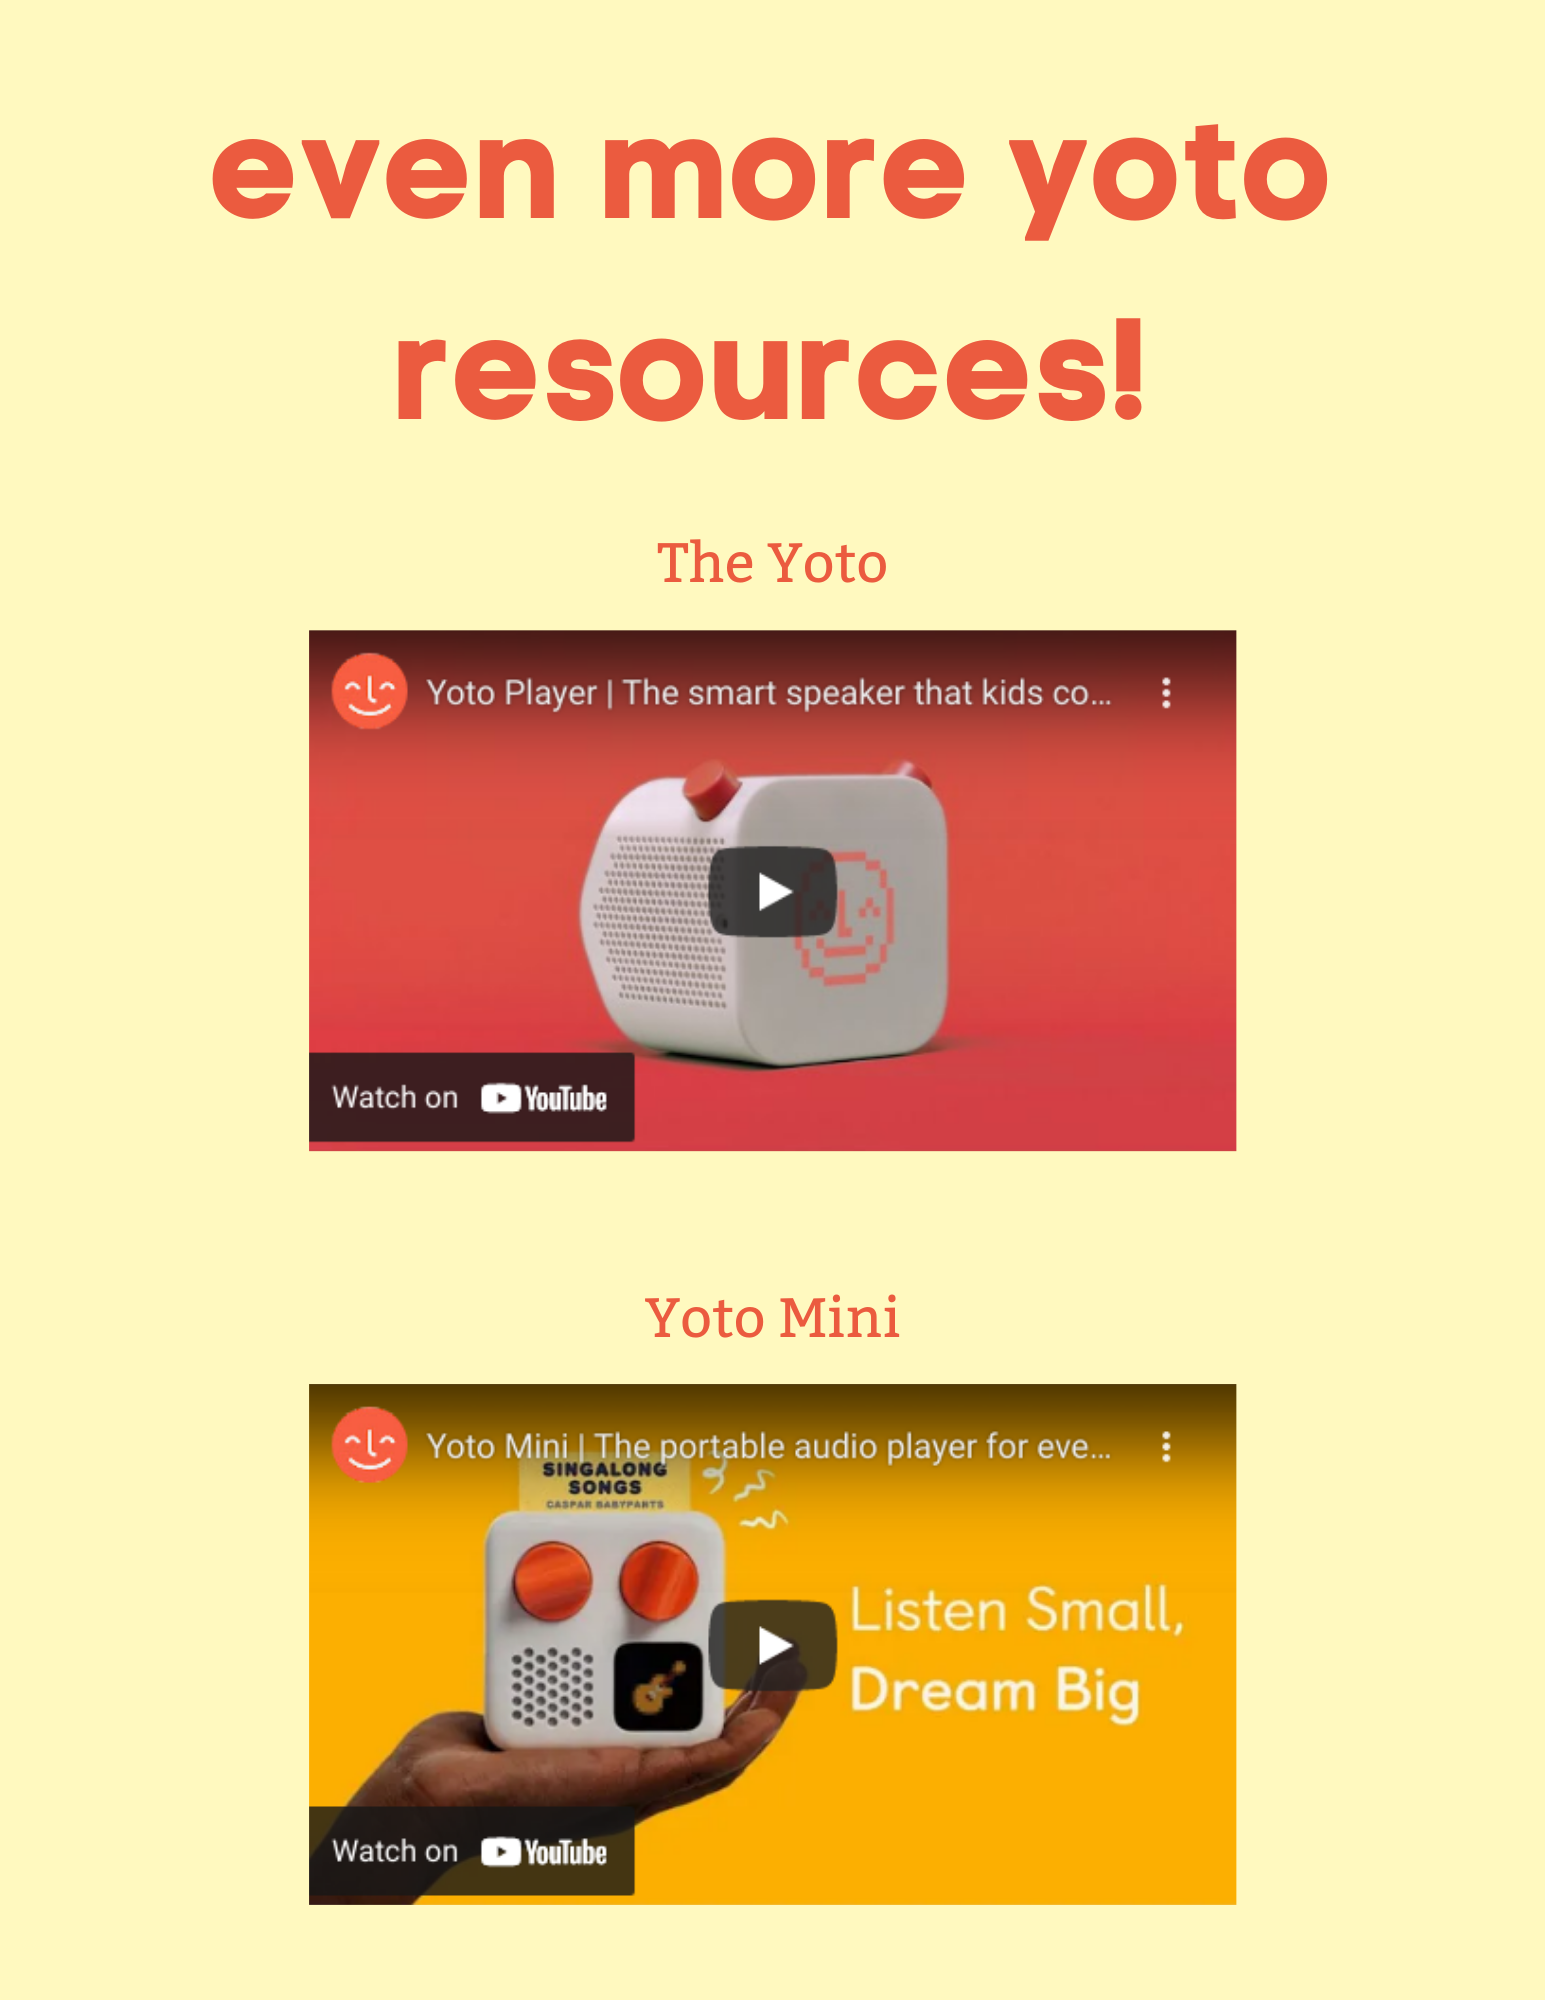 "Even More Yoto Resources." There are two videos available from Yoto, one explaining more in depth about the Yoto and the other the Yoto Mini. Video links are provided below. 